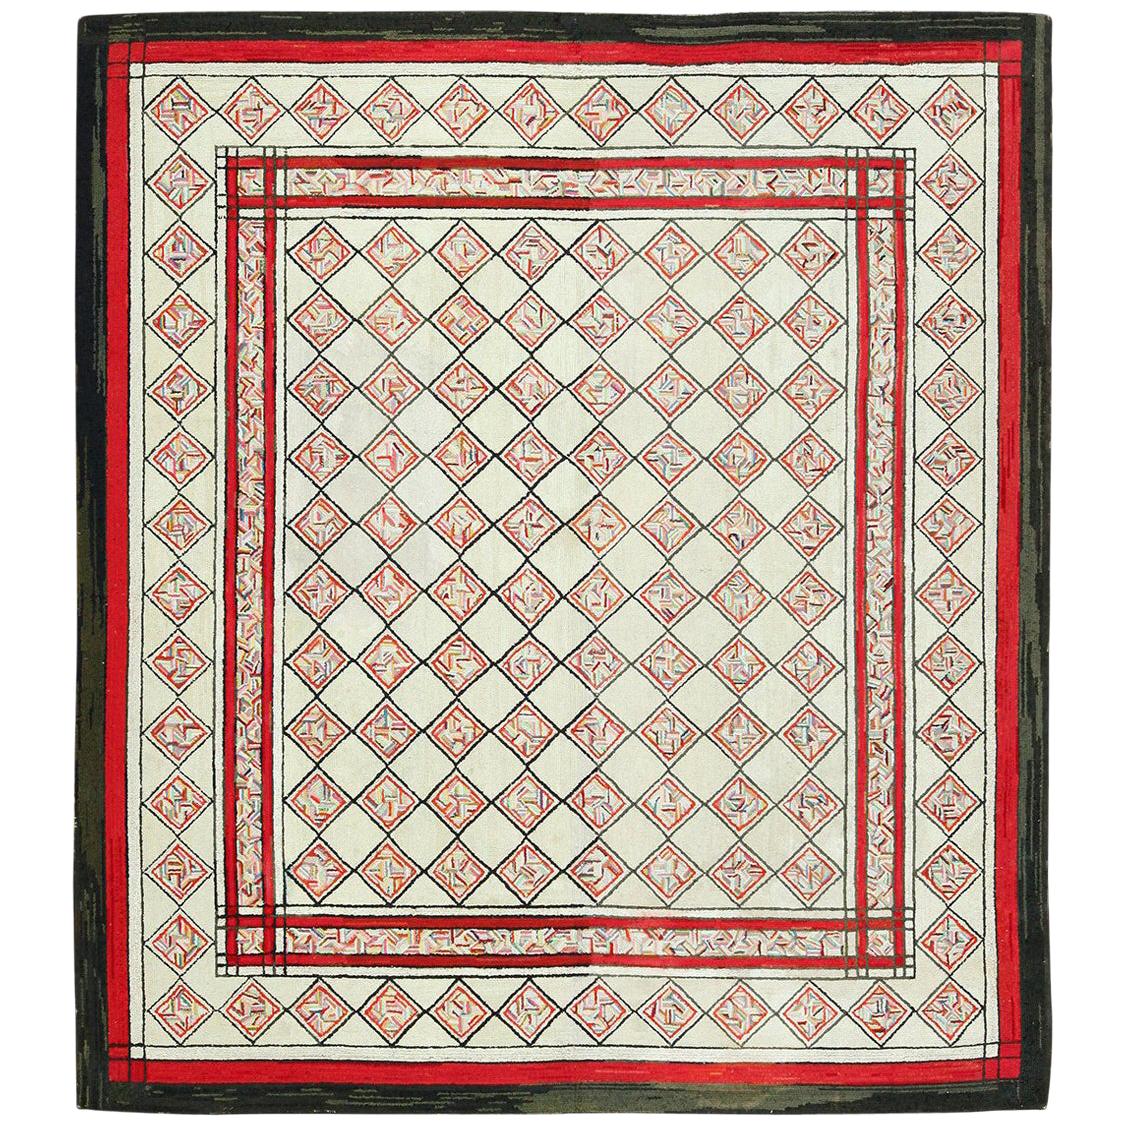 Vintage Art Deco American Hooked Rug. Size:6 ft 4 in x 7 ft 4 in 